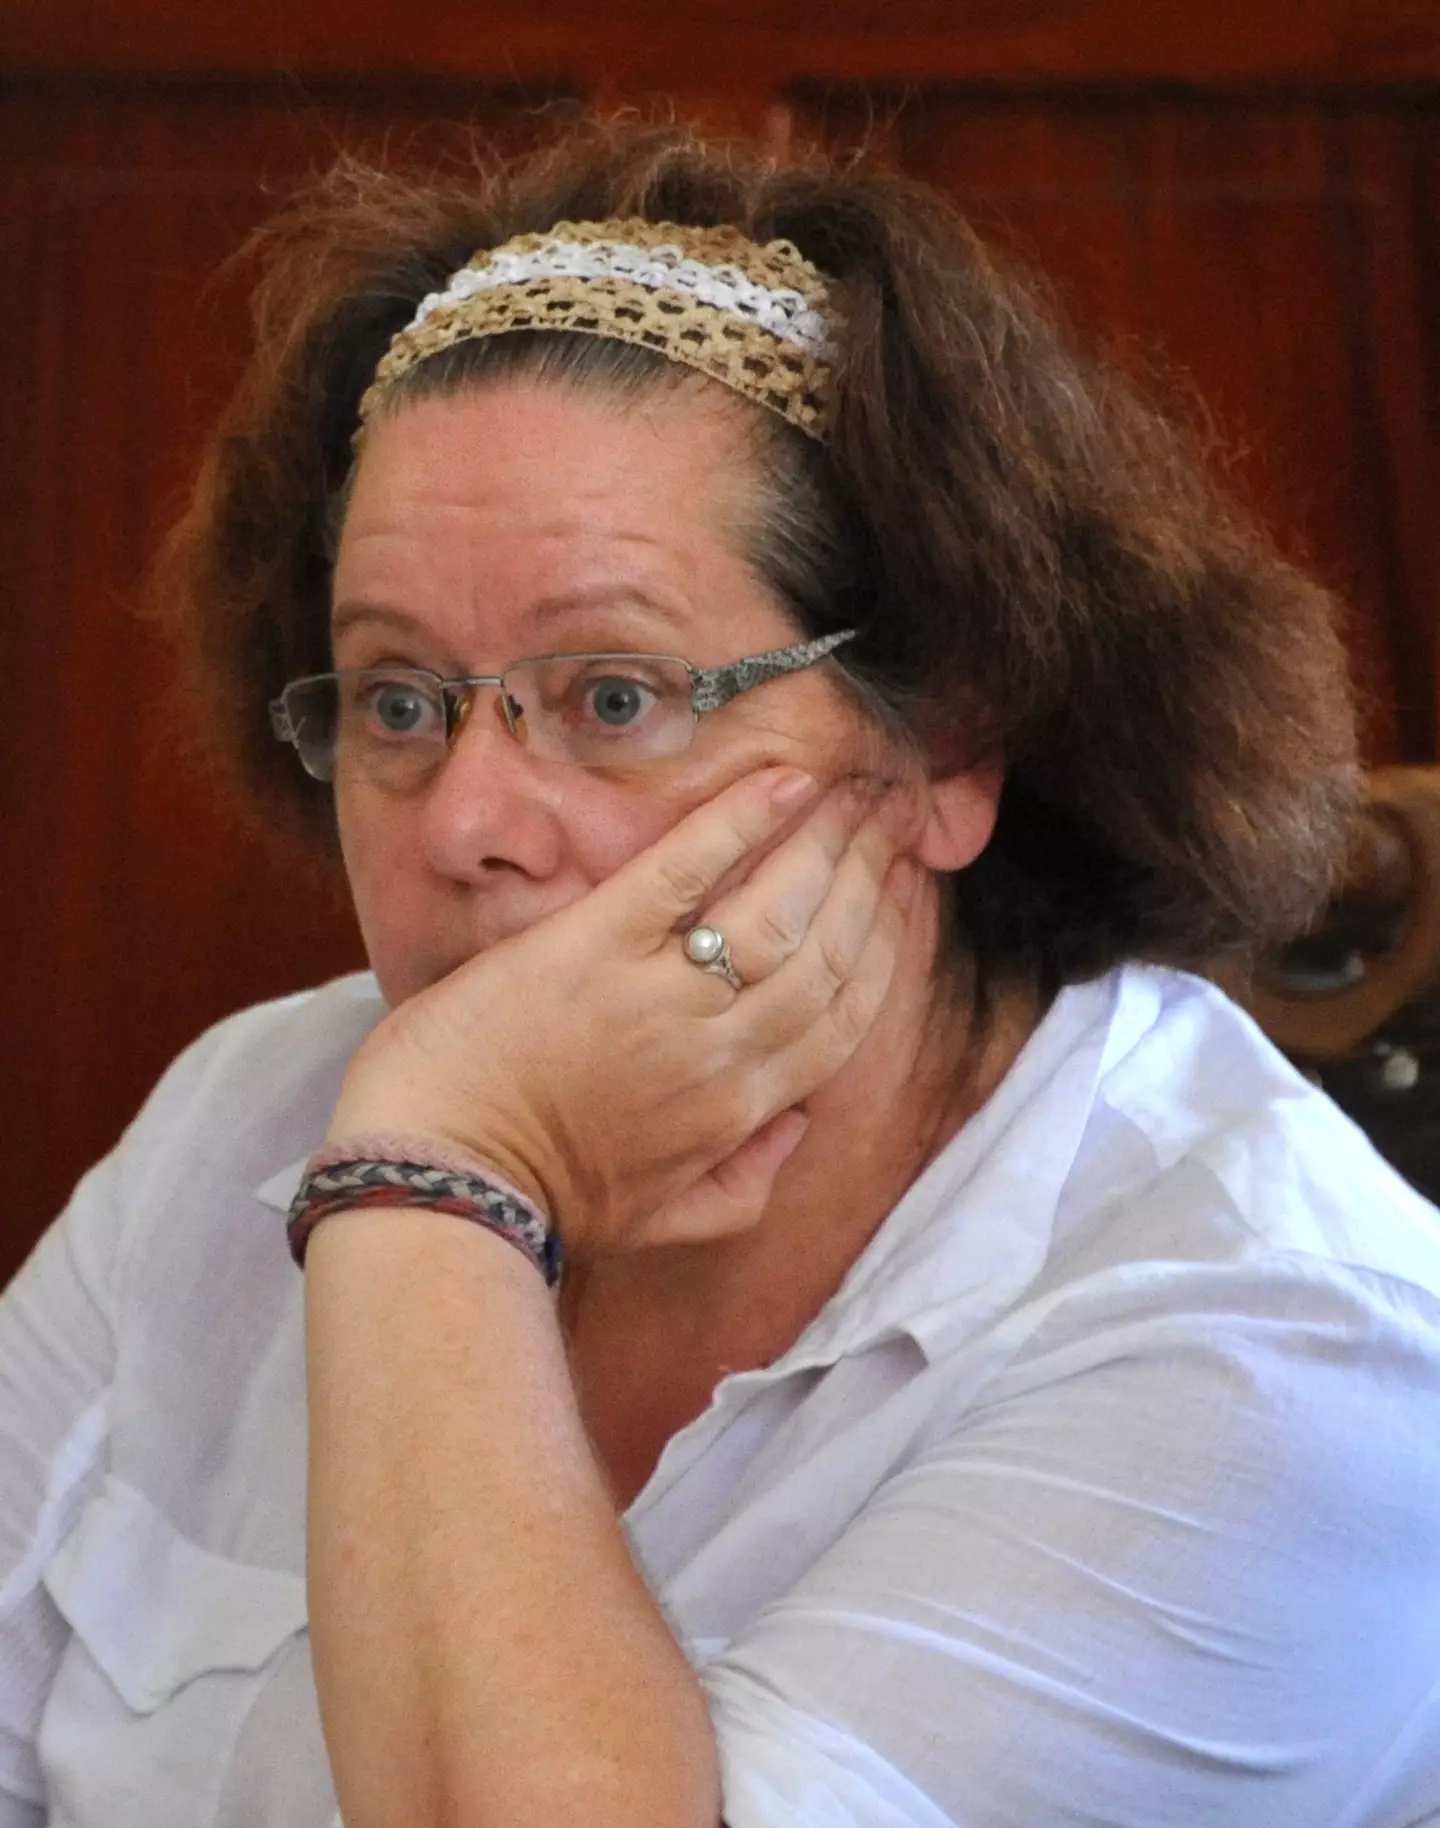 Lindsay Sandiford has been on death row for over a decade.